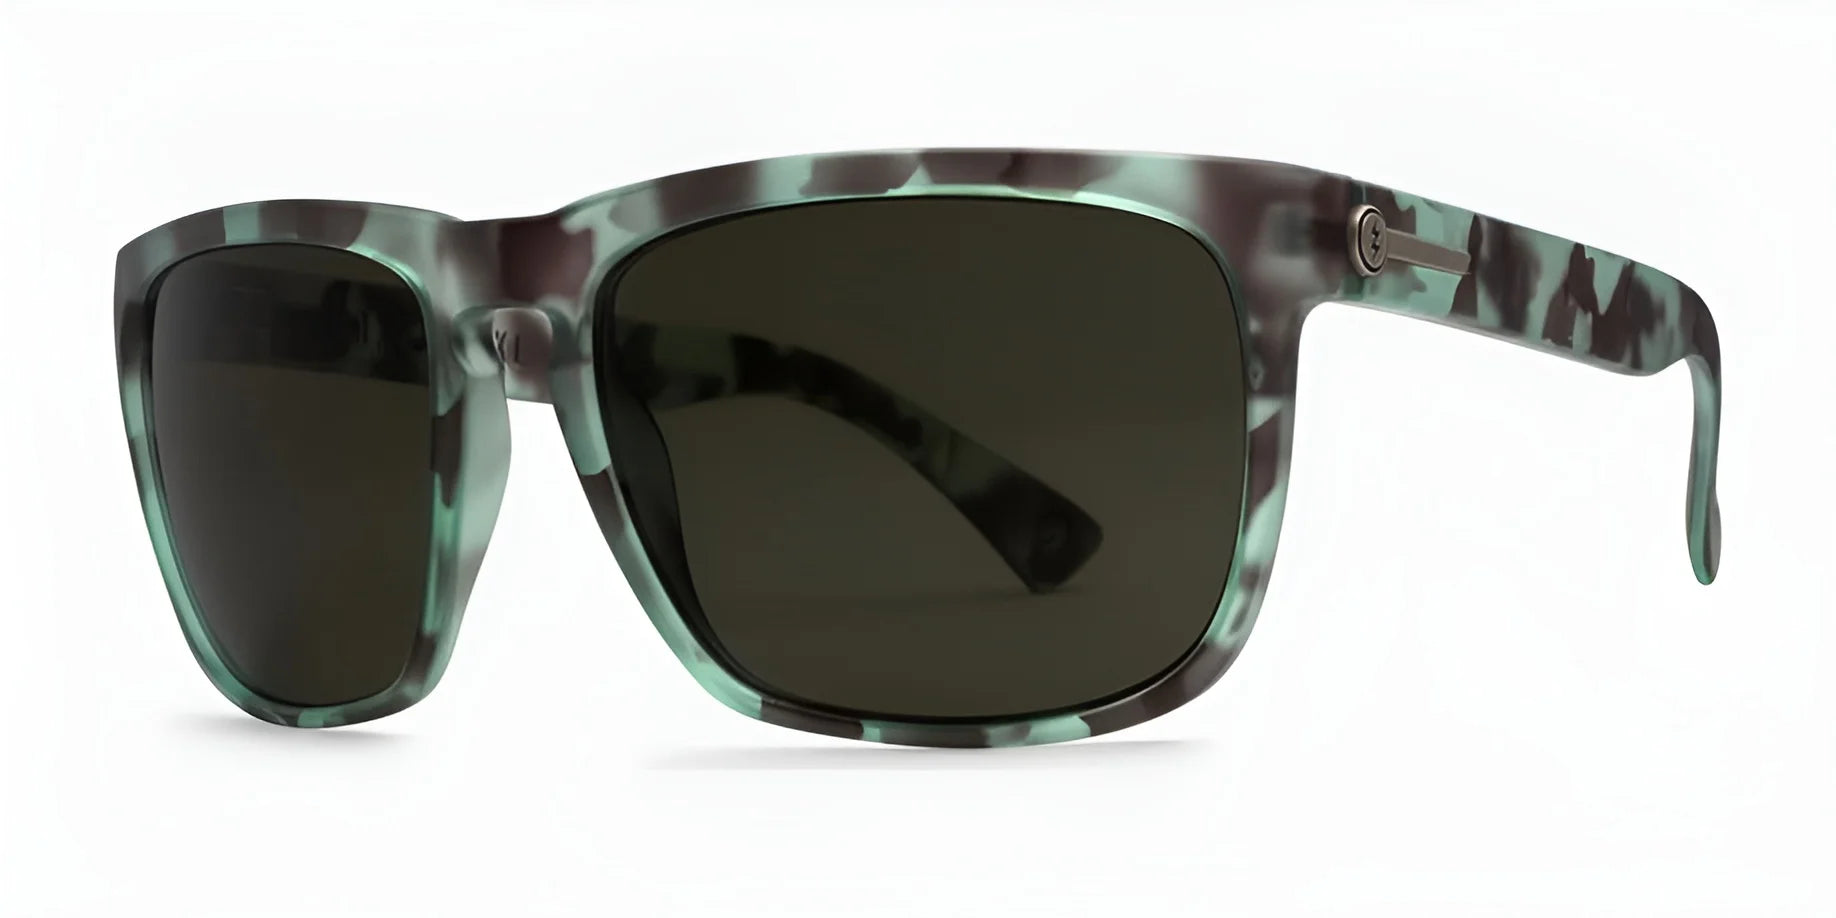 Electric Knoxville XL Sunglasses Gulf Tort / Grey Polarized